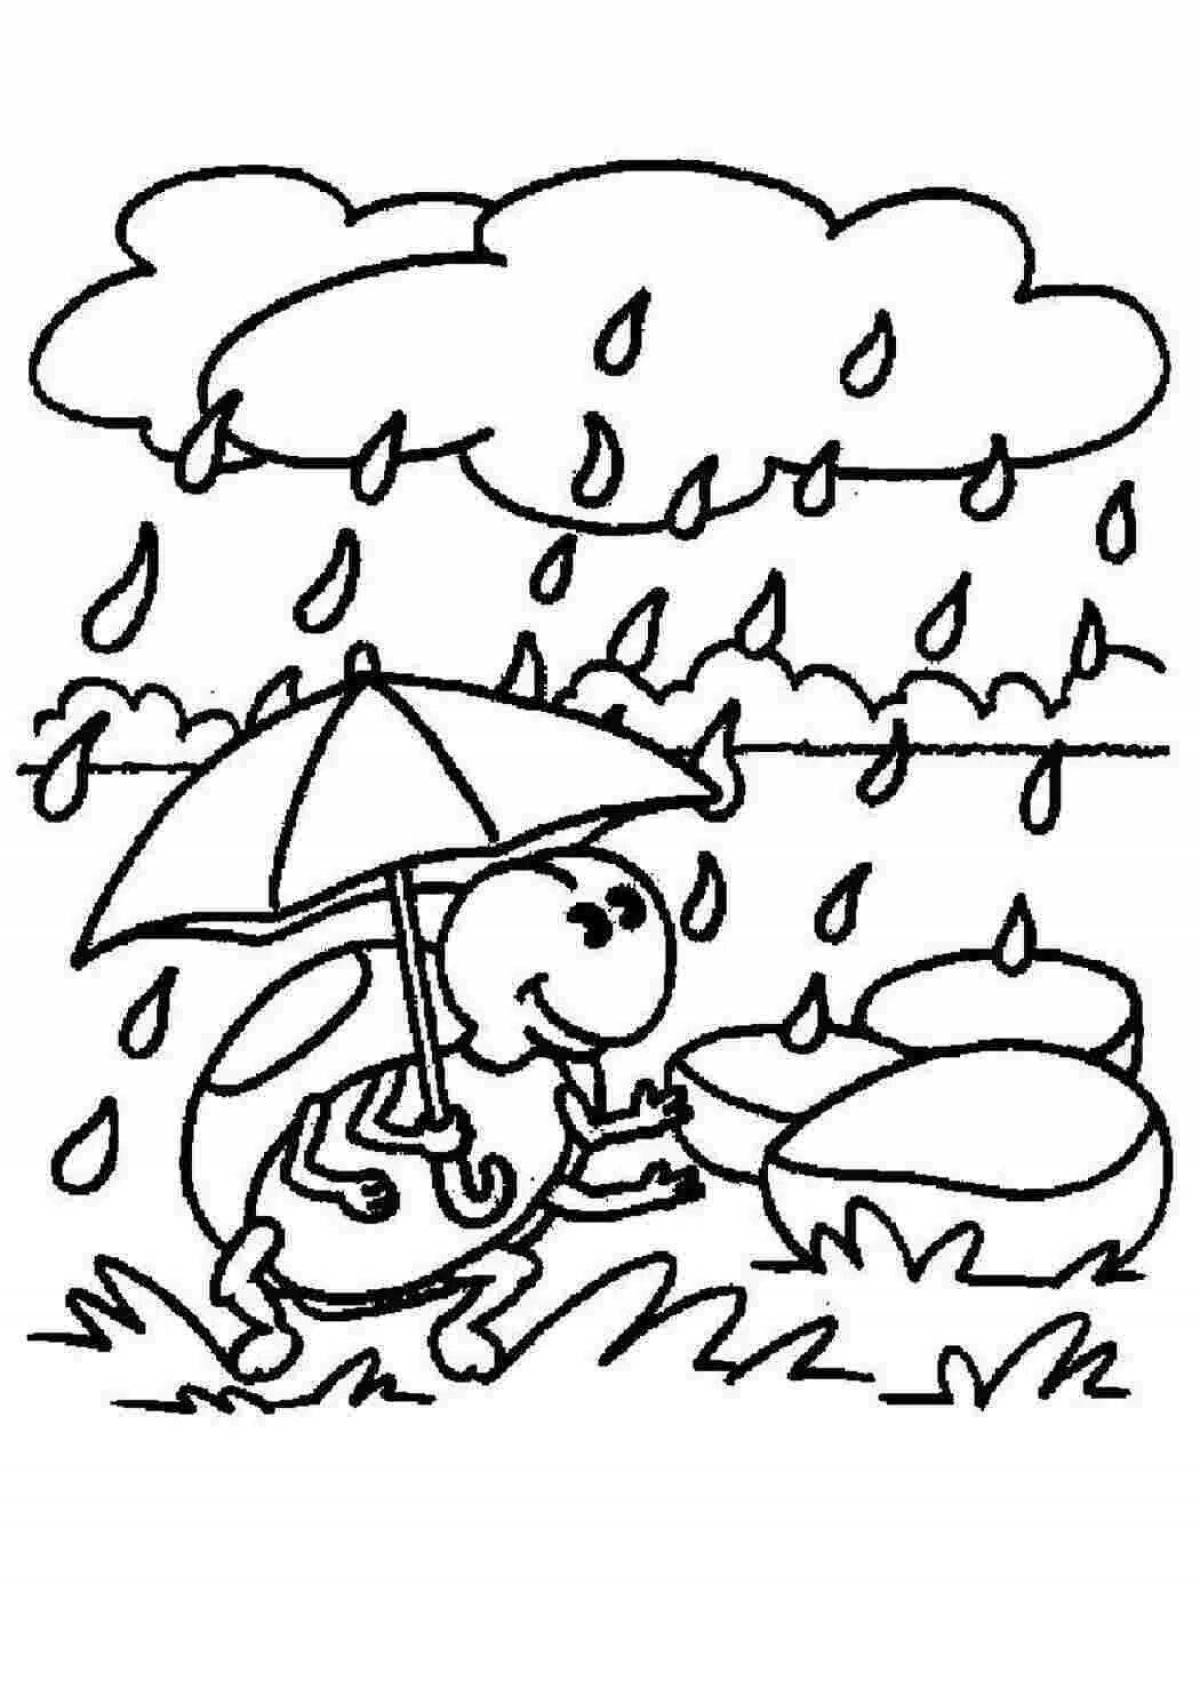 Adorable rain coloring for kids